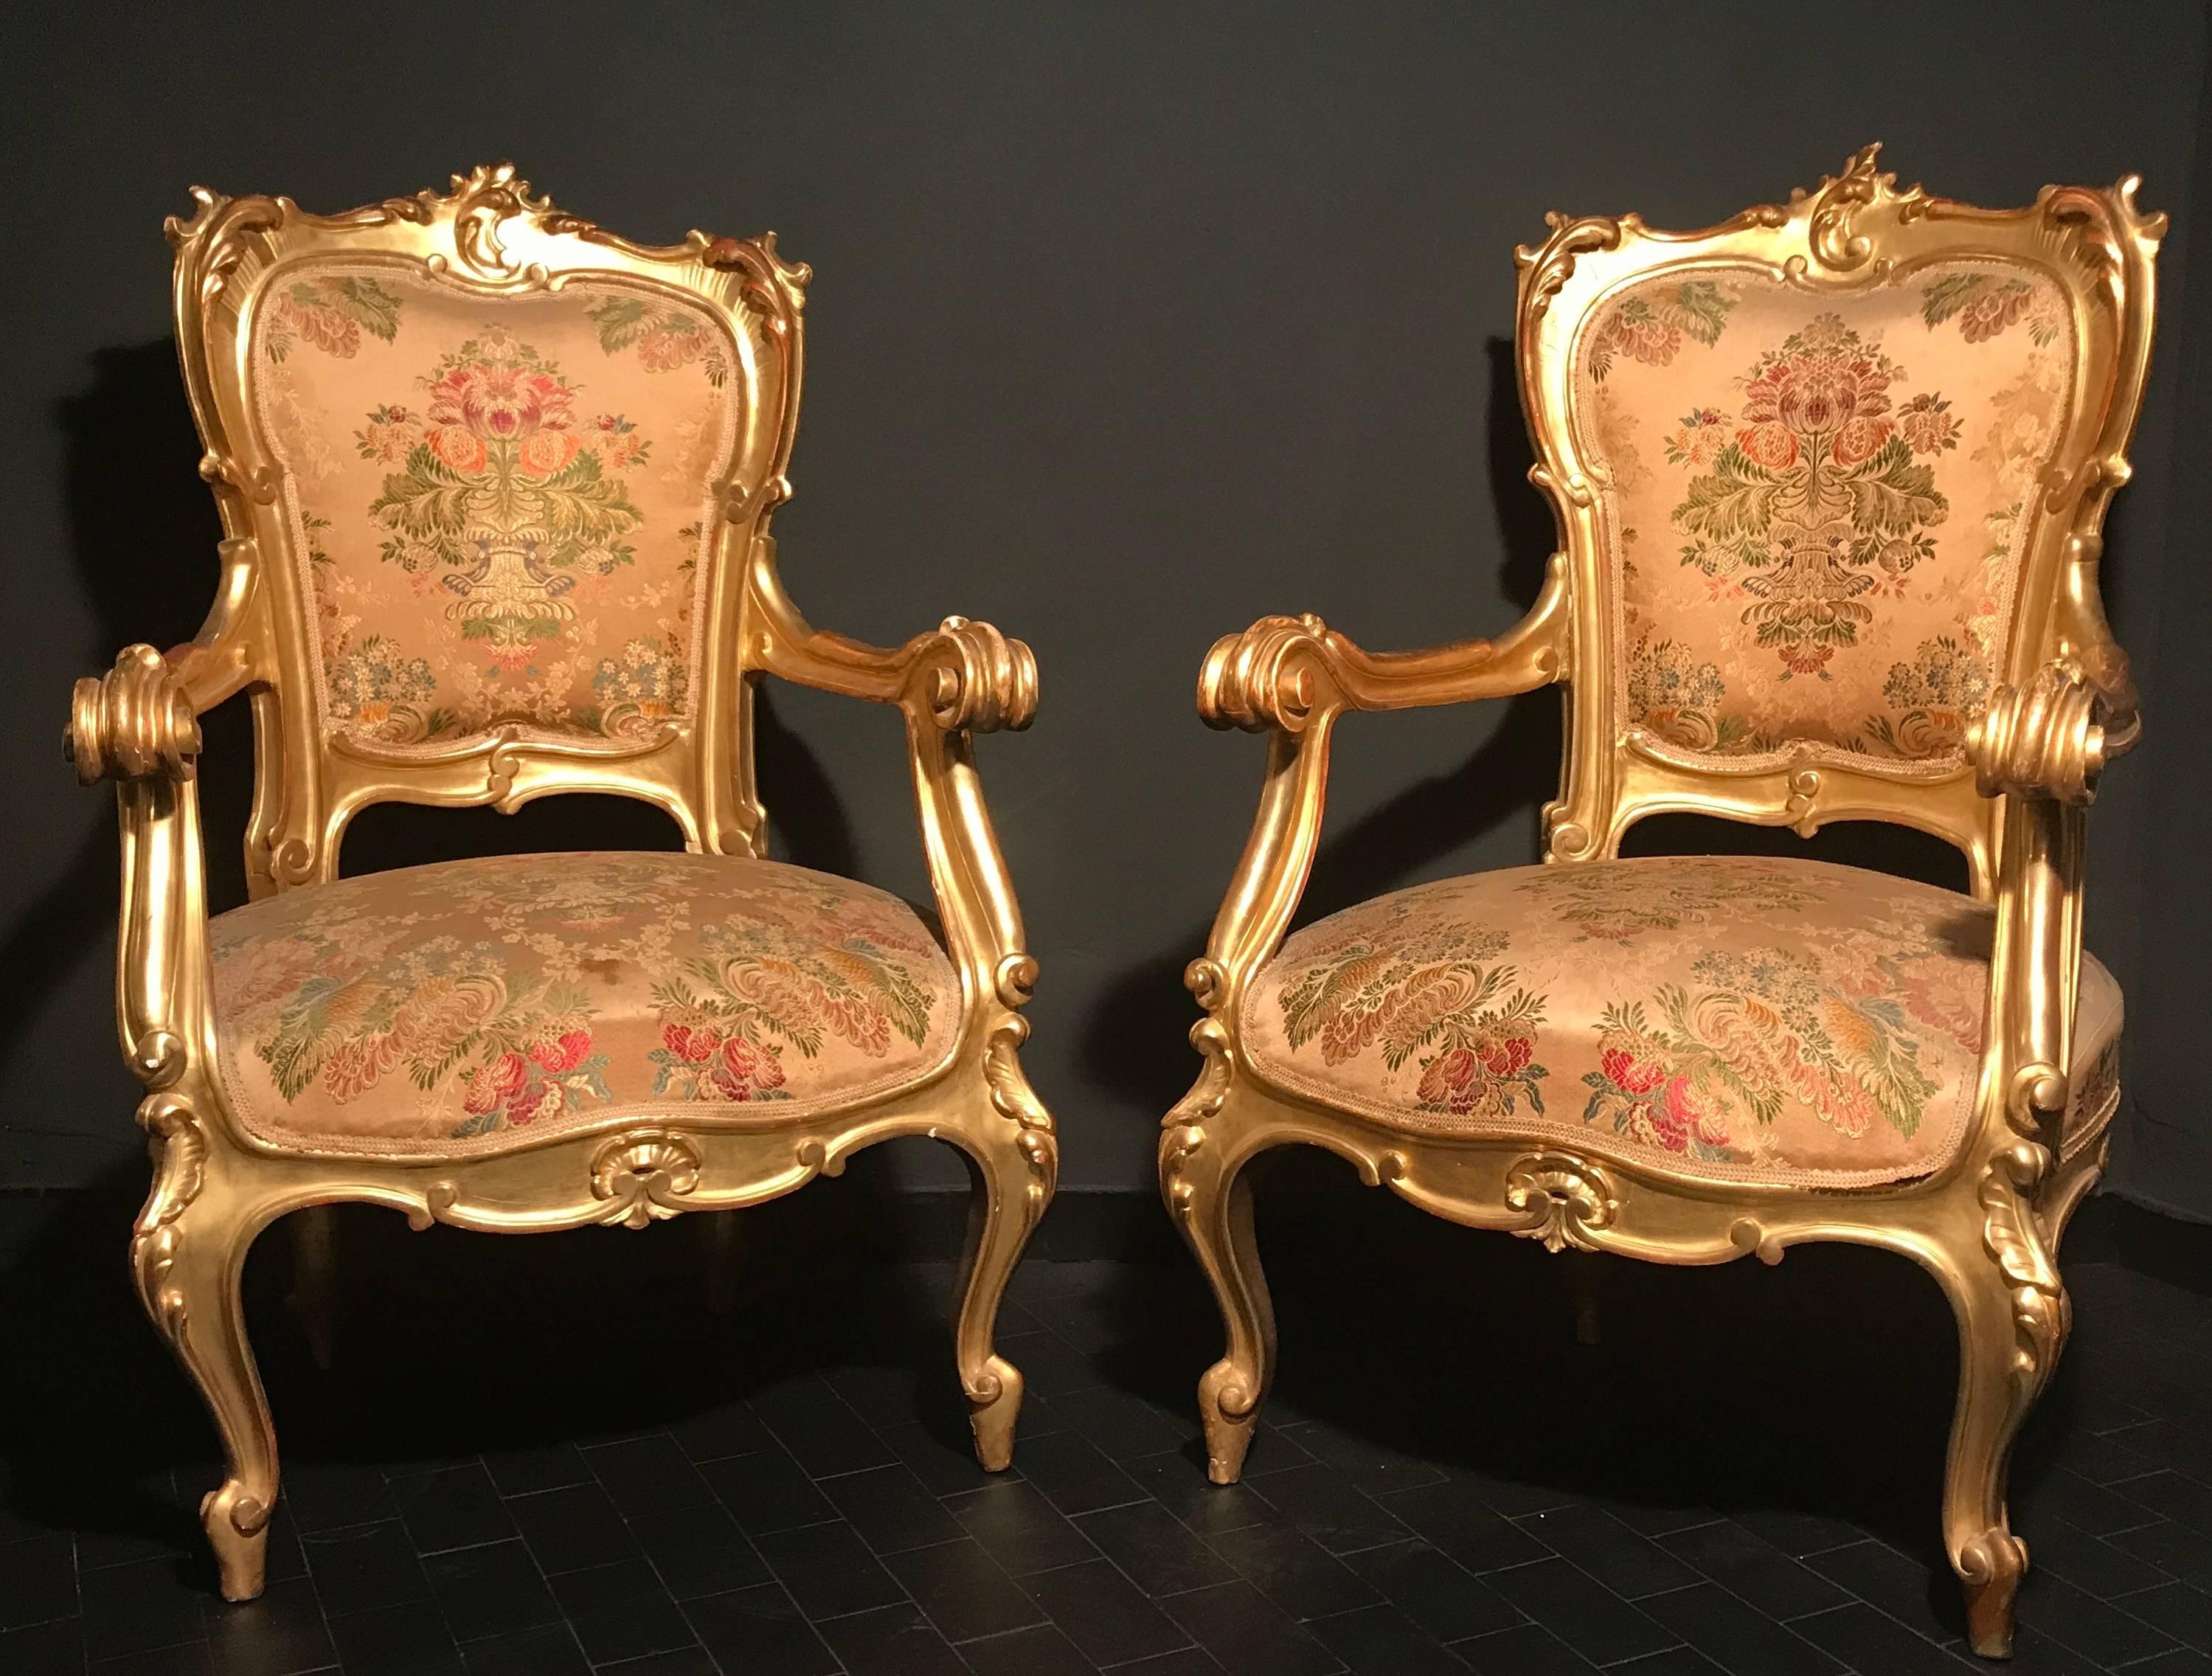 This extraordinary and finely carved five piece suite comprising of one sofa, two armchairs and two single chairs with original gilding.
It's part of an eleven piece s salon set published 1stdibs Reference #:
LU985910554043
Provenience from a